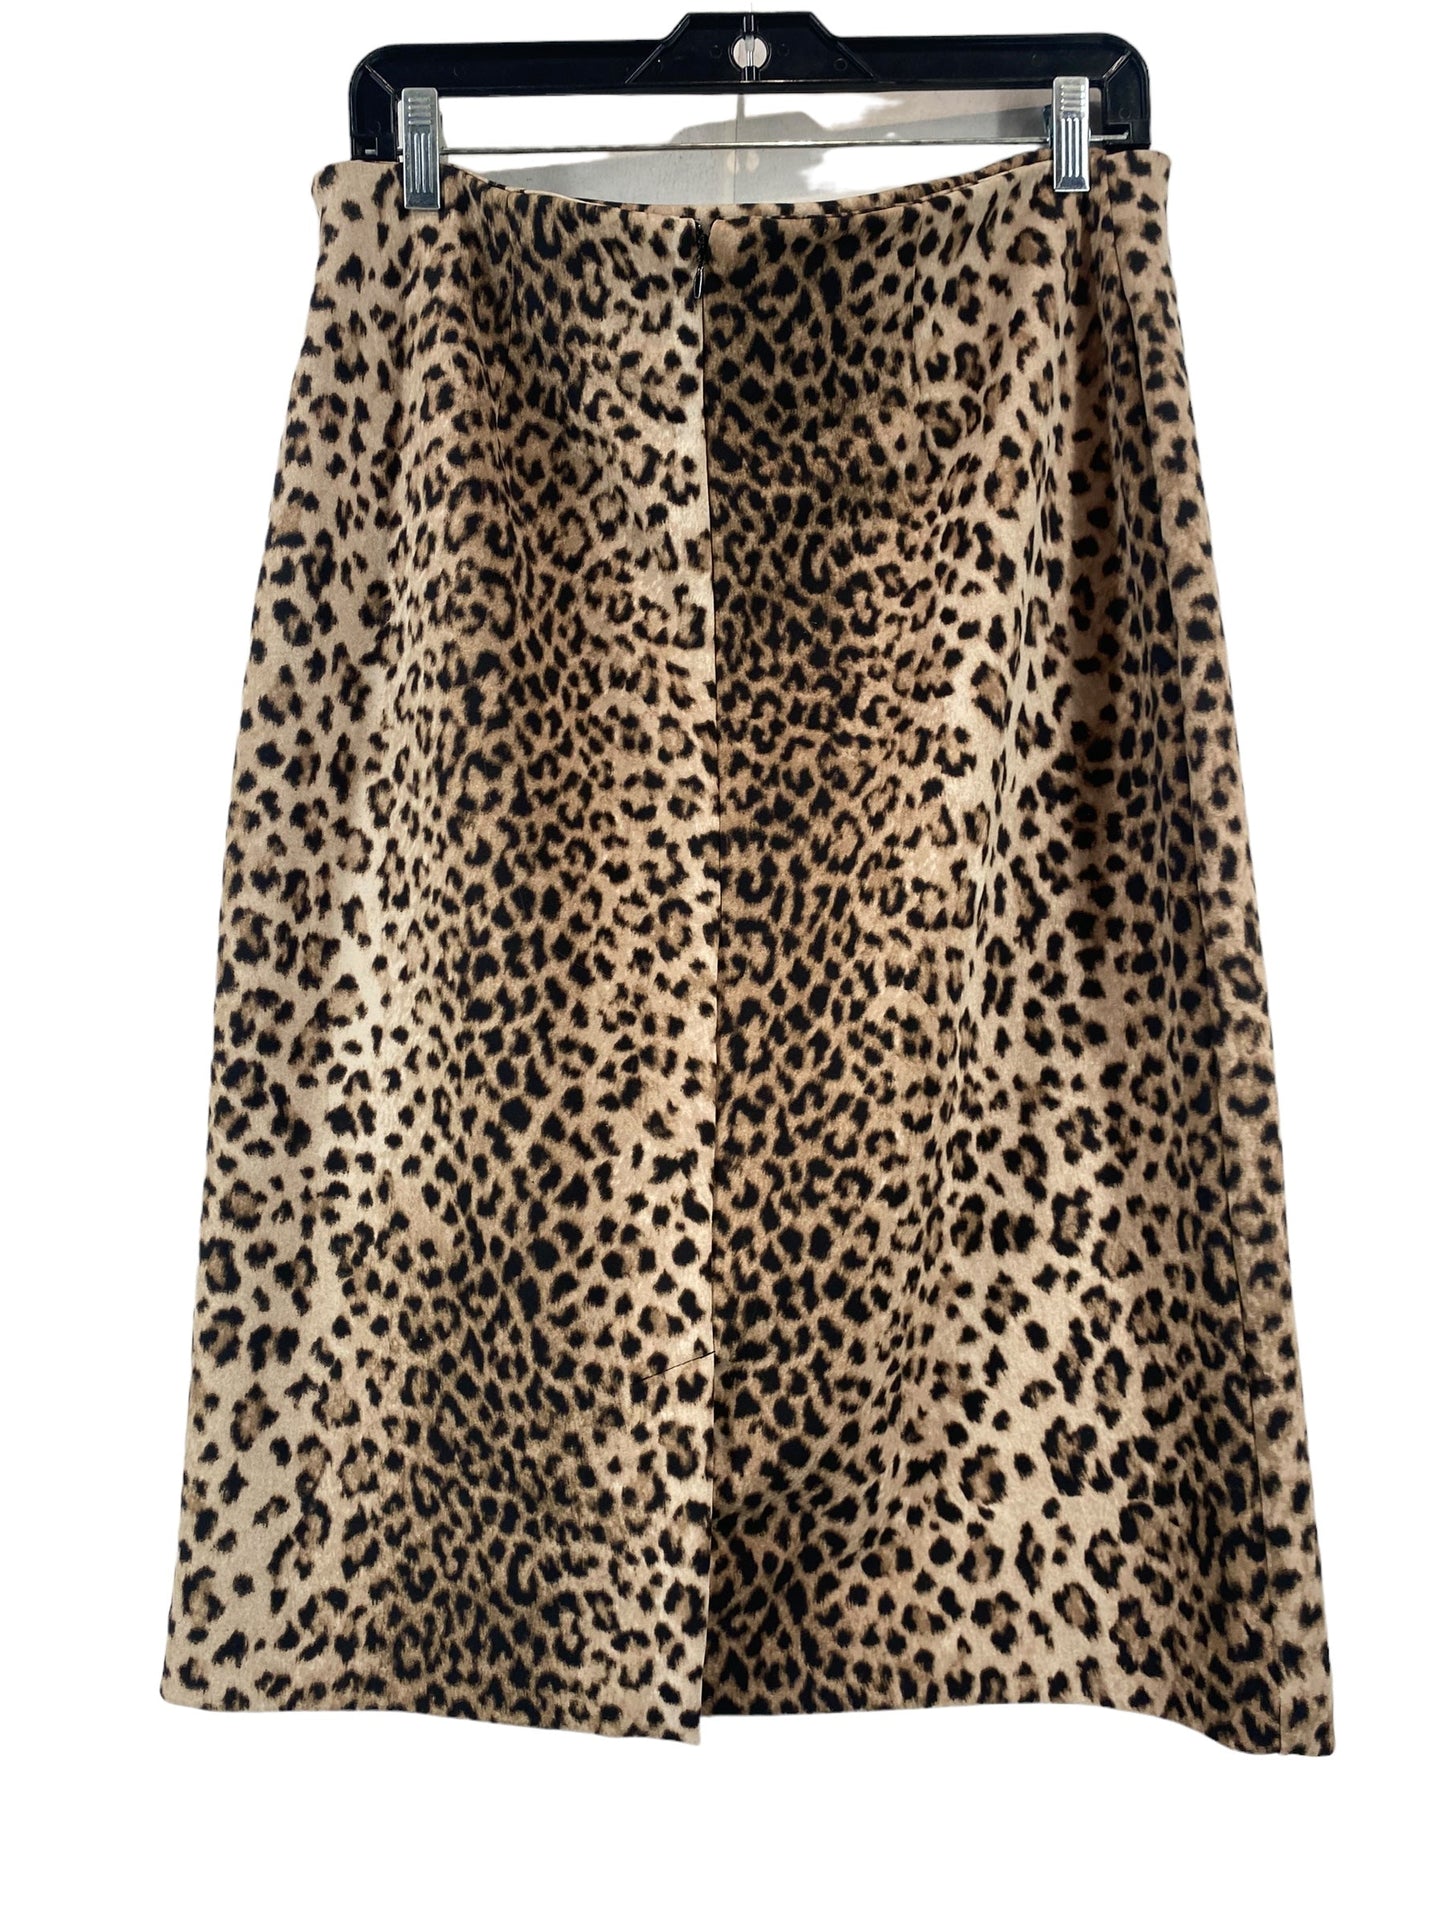 Skirt Midi By Nicole By Nicole Miller  Size: L